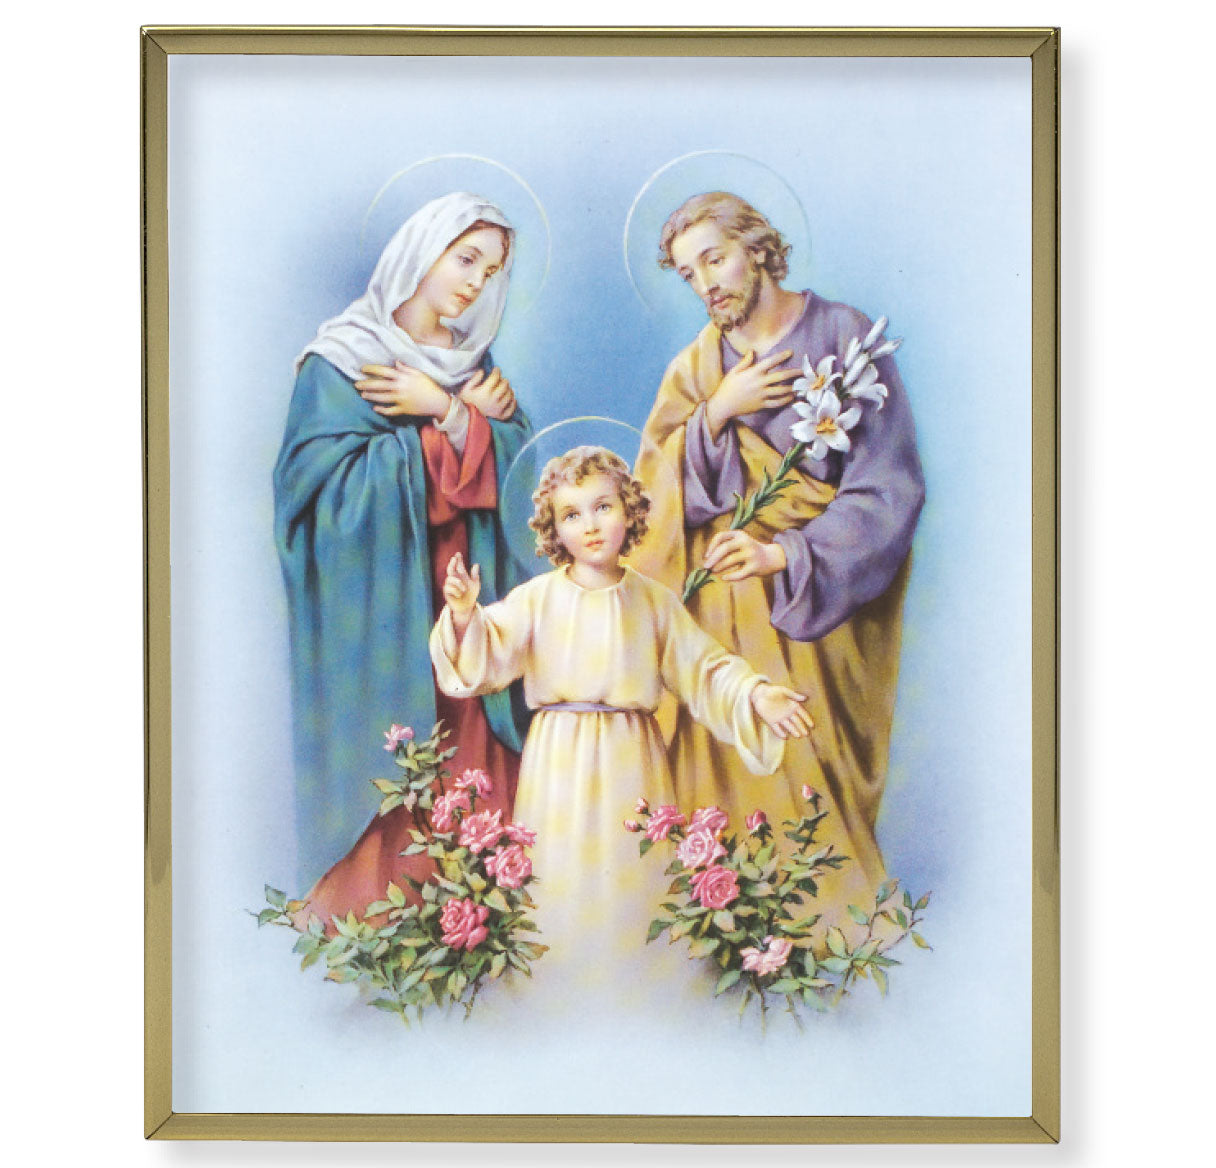 Holy Family Picture Framed Plaque, Large, Gold Plaque Frame